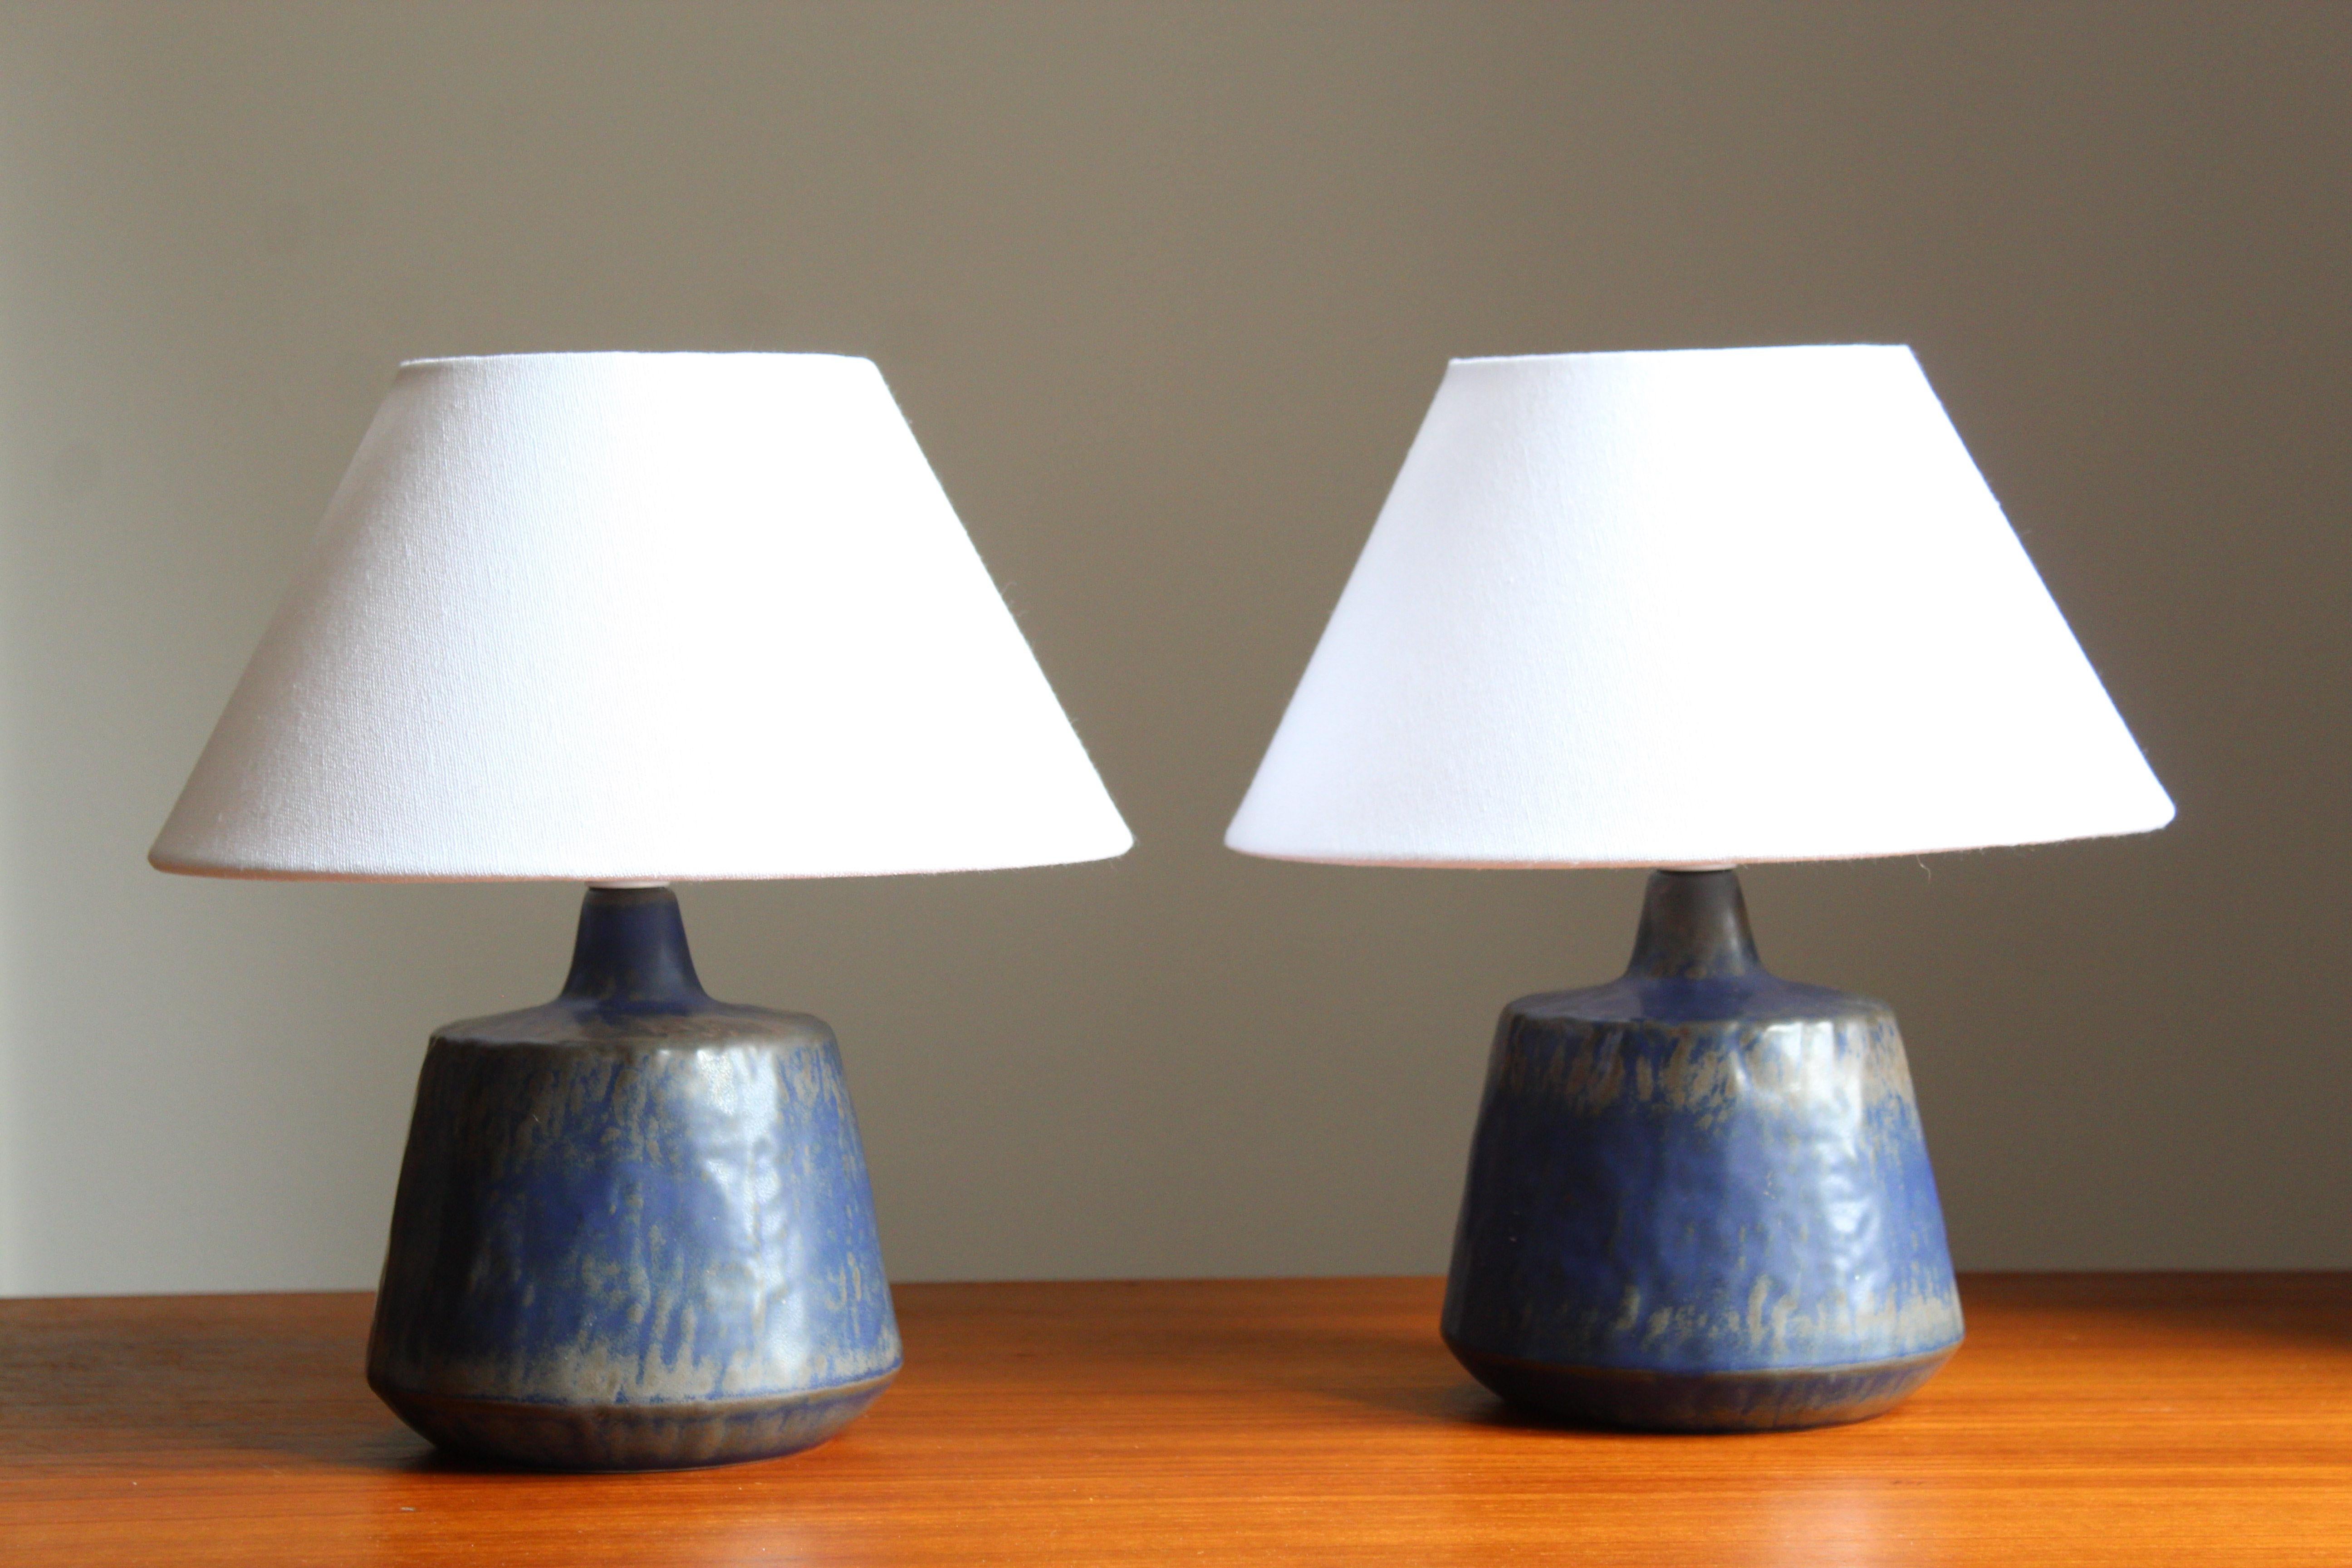 A pair table lamps produced by Rörstrand, Sweden, 1950s. Designed by Gunnar Nylund, (Swedish, 1914-1997). Signed. Sold without lampshades.

Nylund served as artistic director at Rörstrand, where he worked, 1931-1955. Prior to his work at Rörstrand